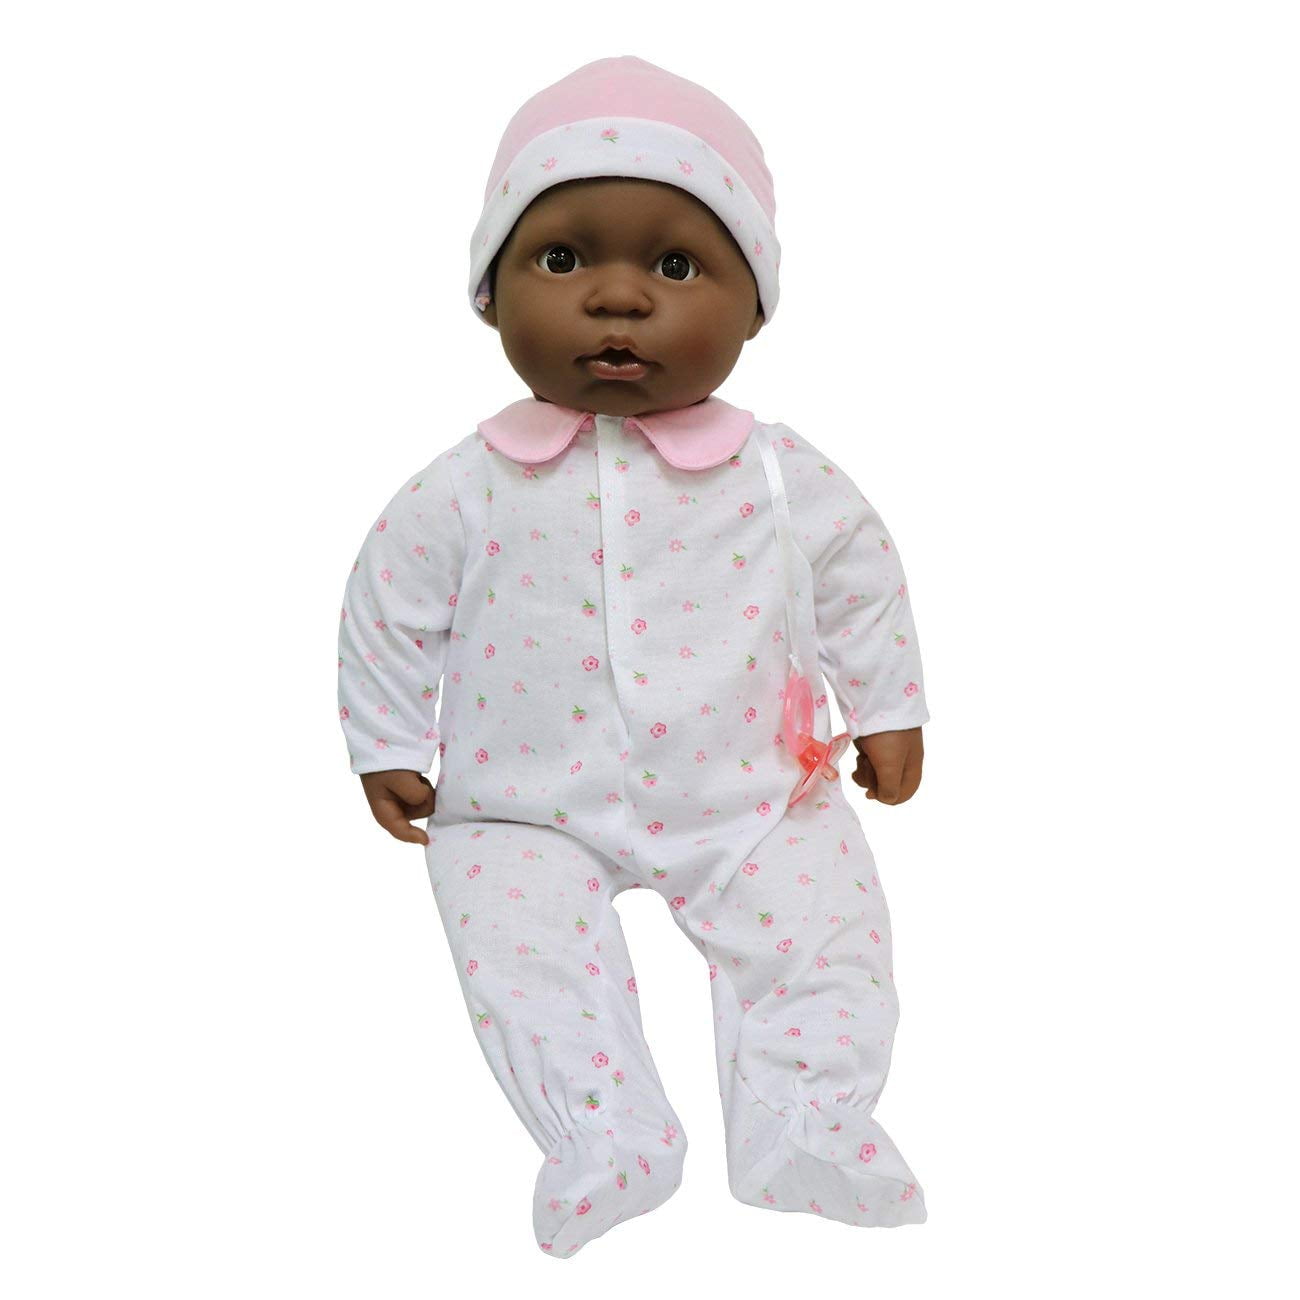 JC Toys, La Baby 20-inch African American Washable Soft Baby Doll with ...